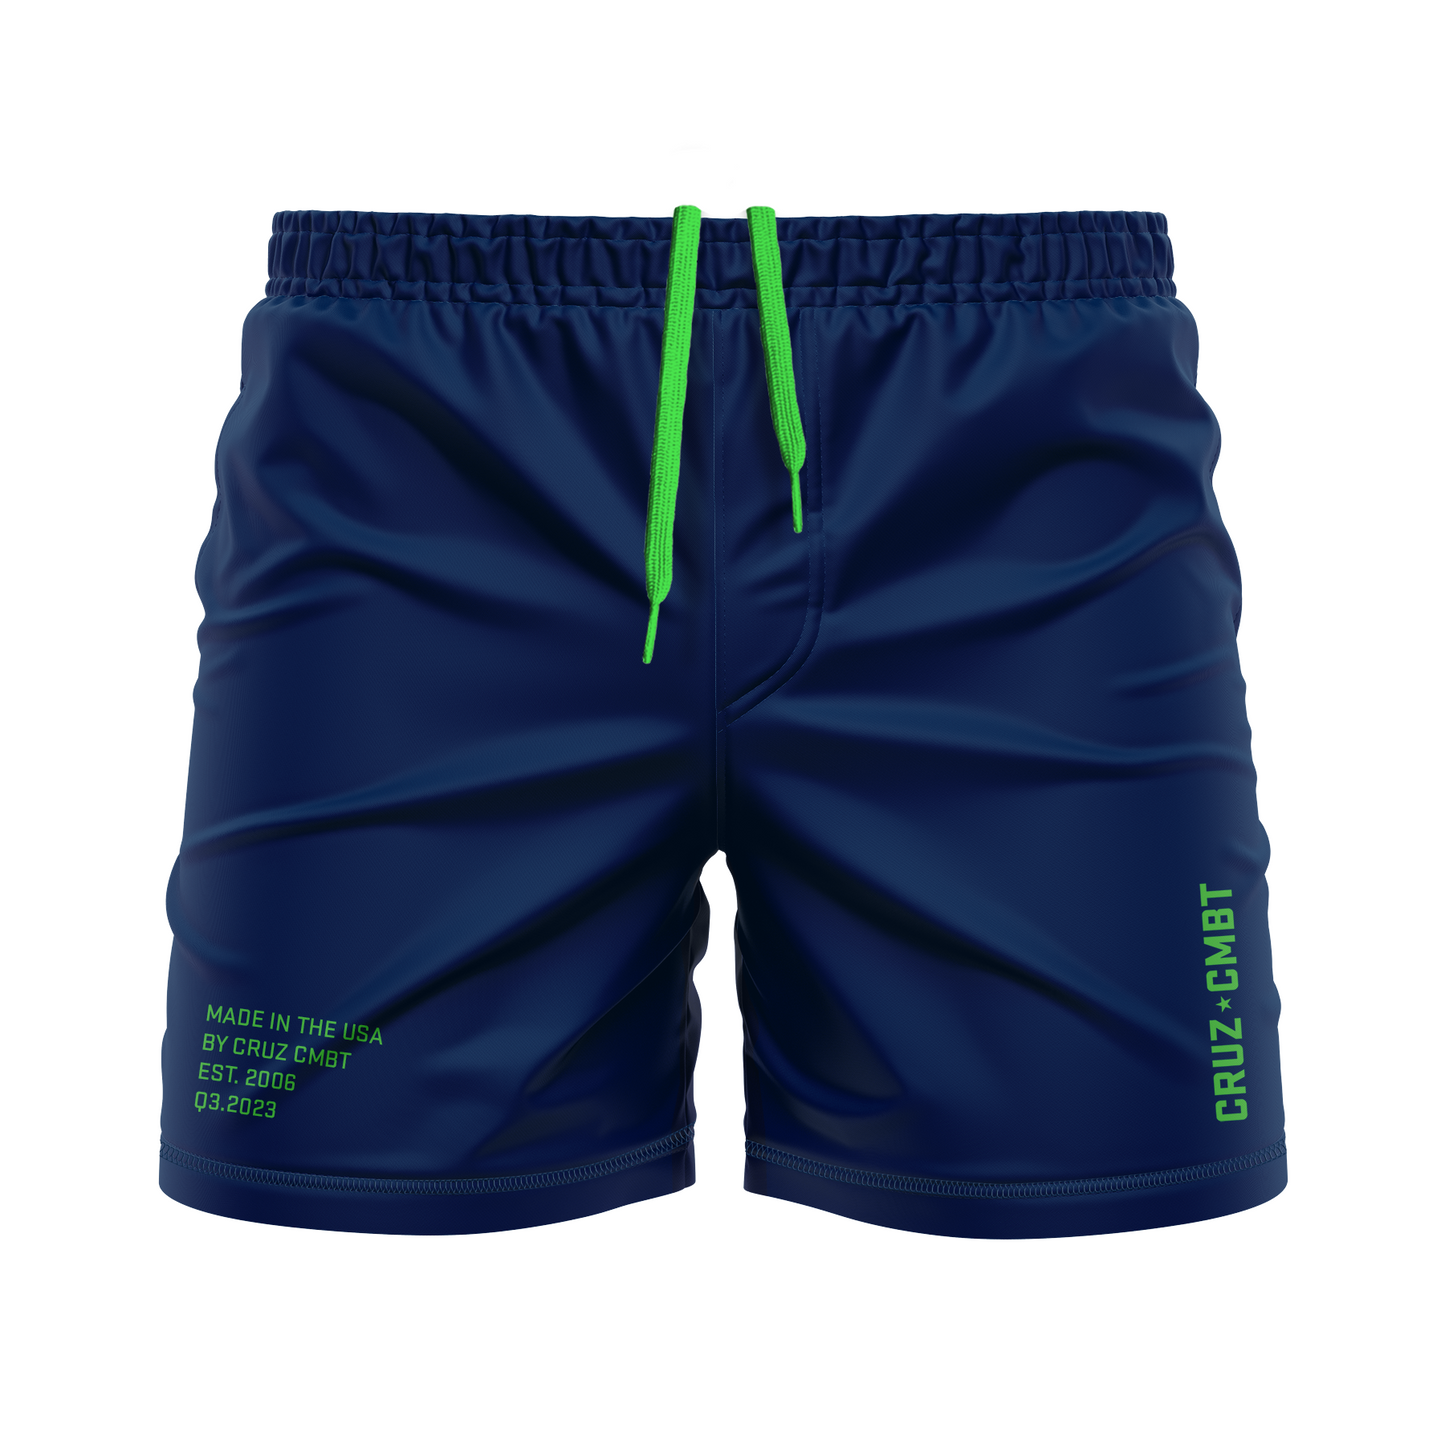 Base Collection men's FC shorts, navy and green